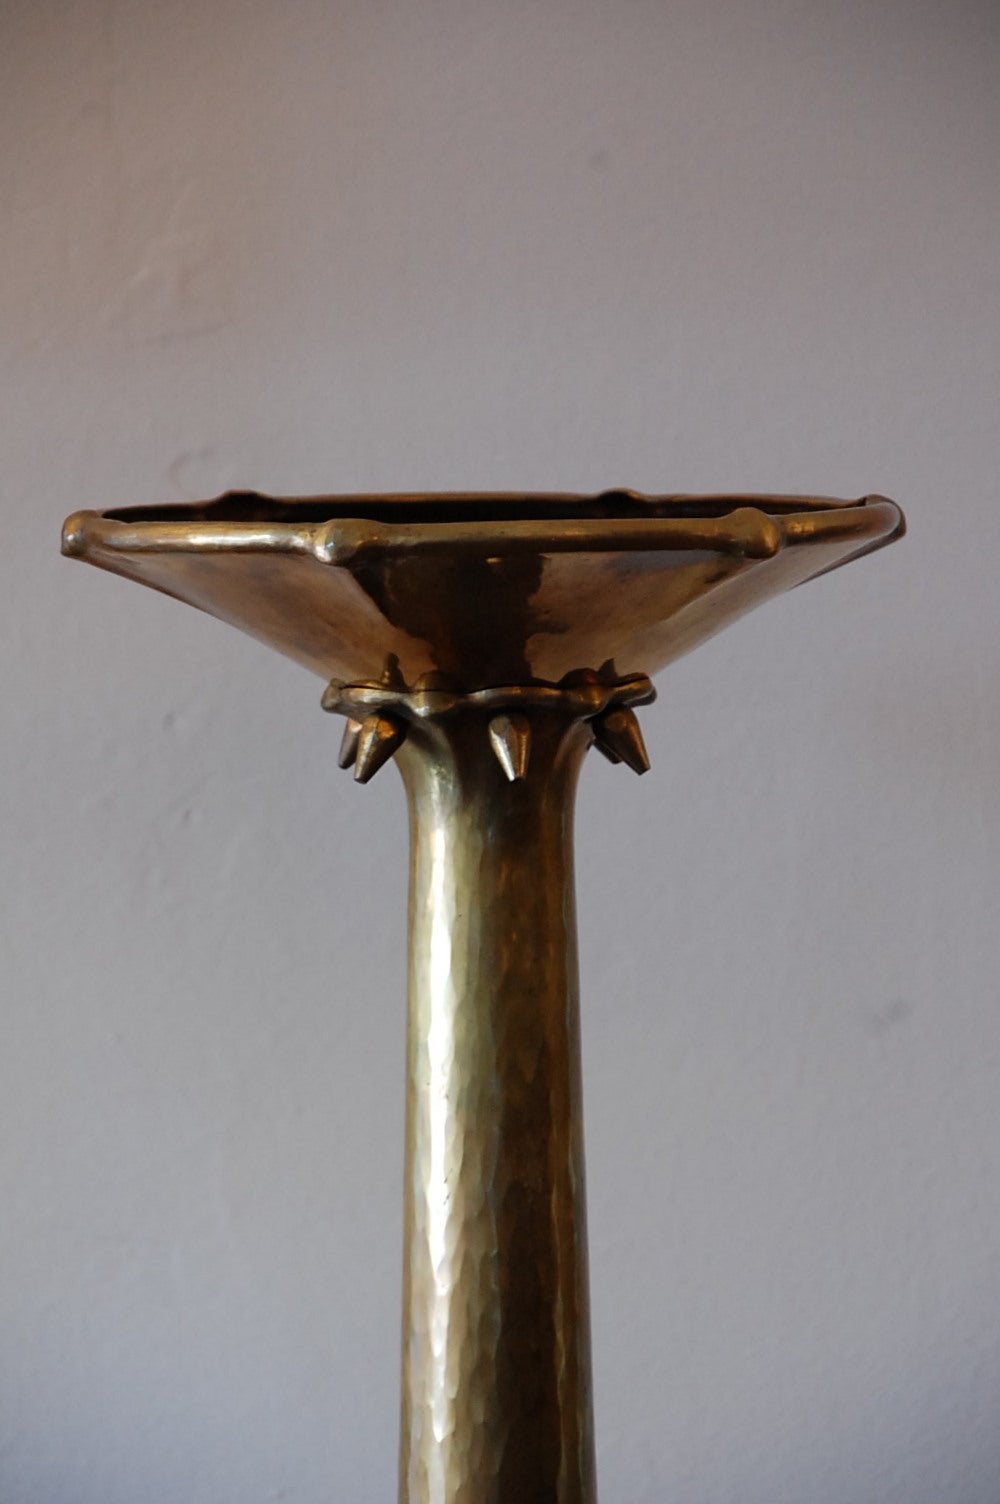 Spectacular hammered brass candlestick by Atelier Brom. Unique rare piece. Unusually large.